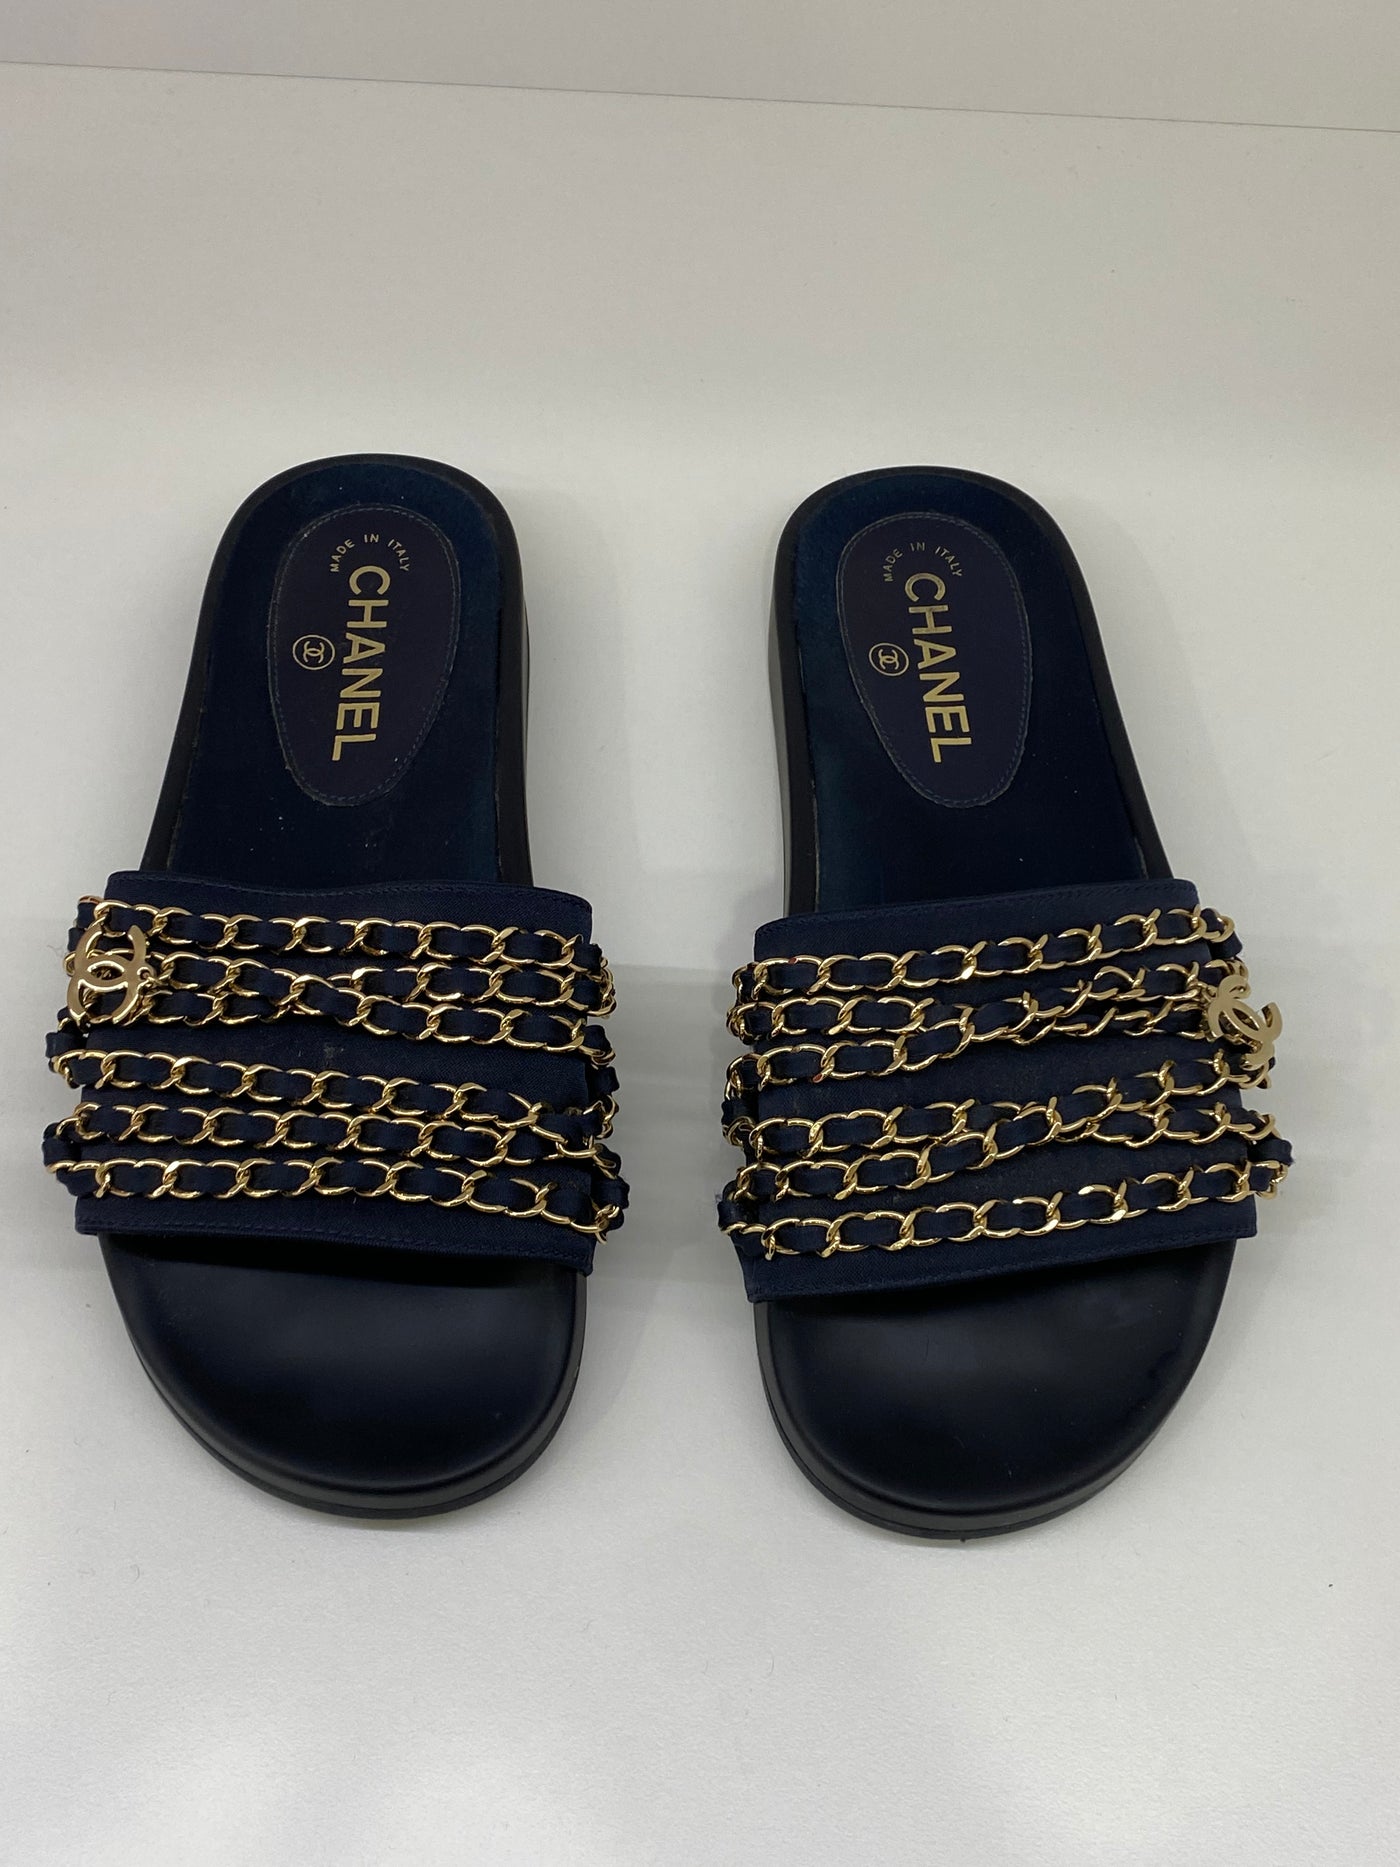 Chanel Navy Slides Gold Chains - Size 38